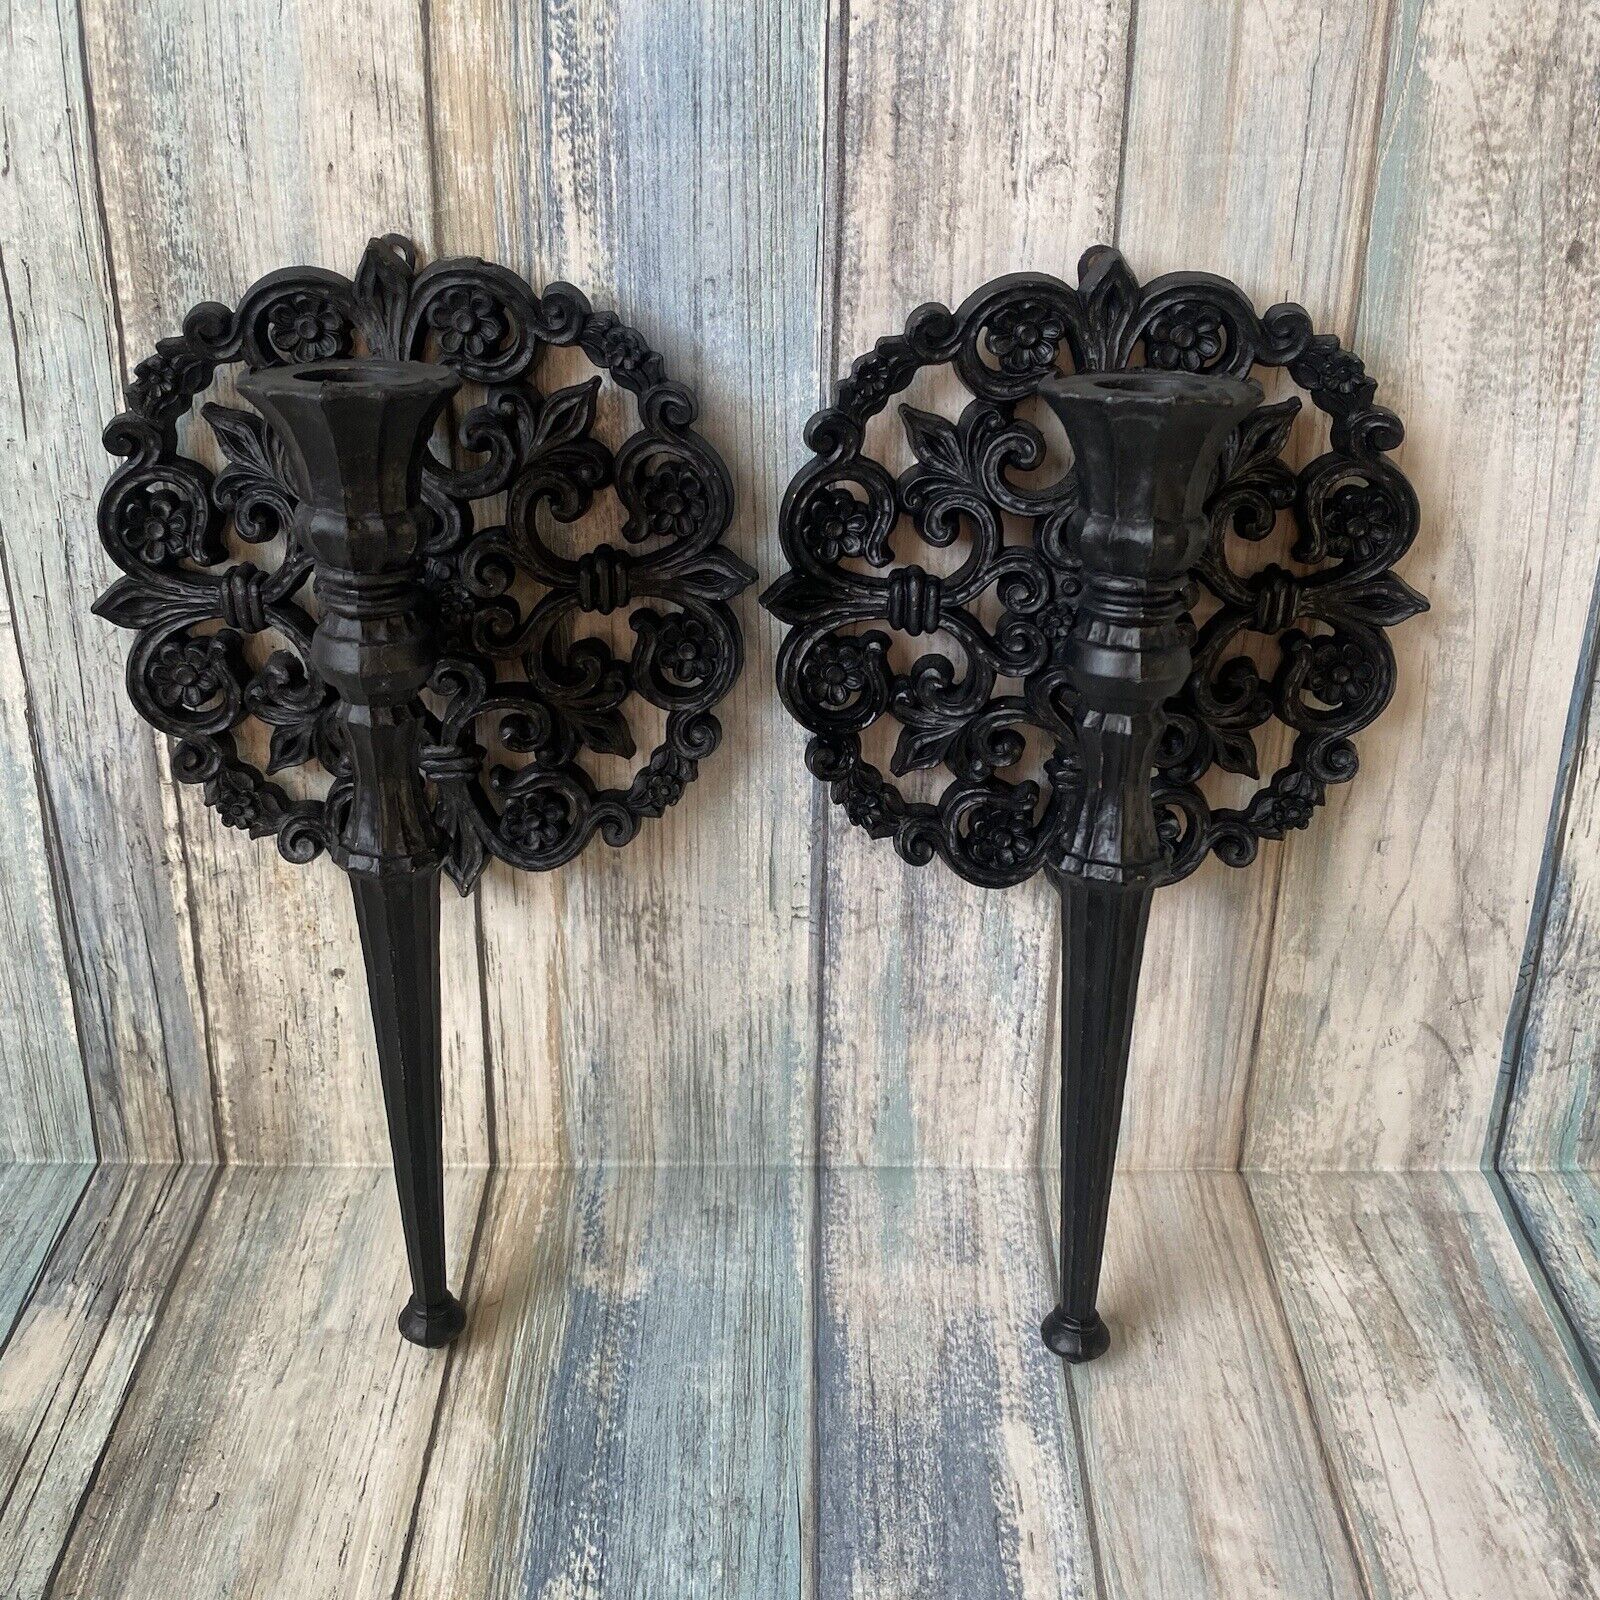 VTG Homco Wall Sconce Candle Holders Pair Gothic Black Witchy MCM Gothcore 10”